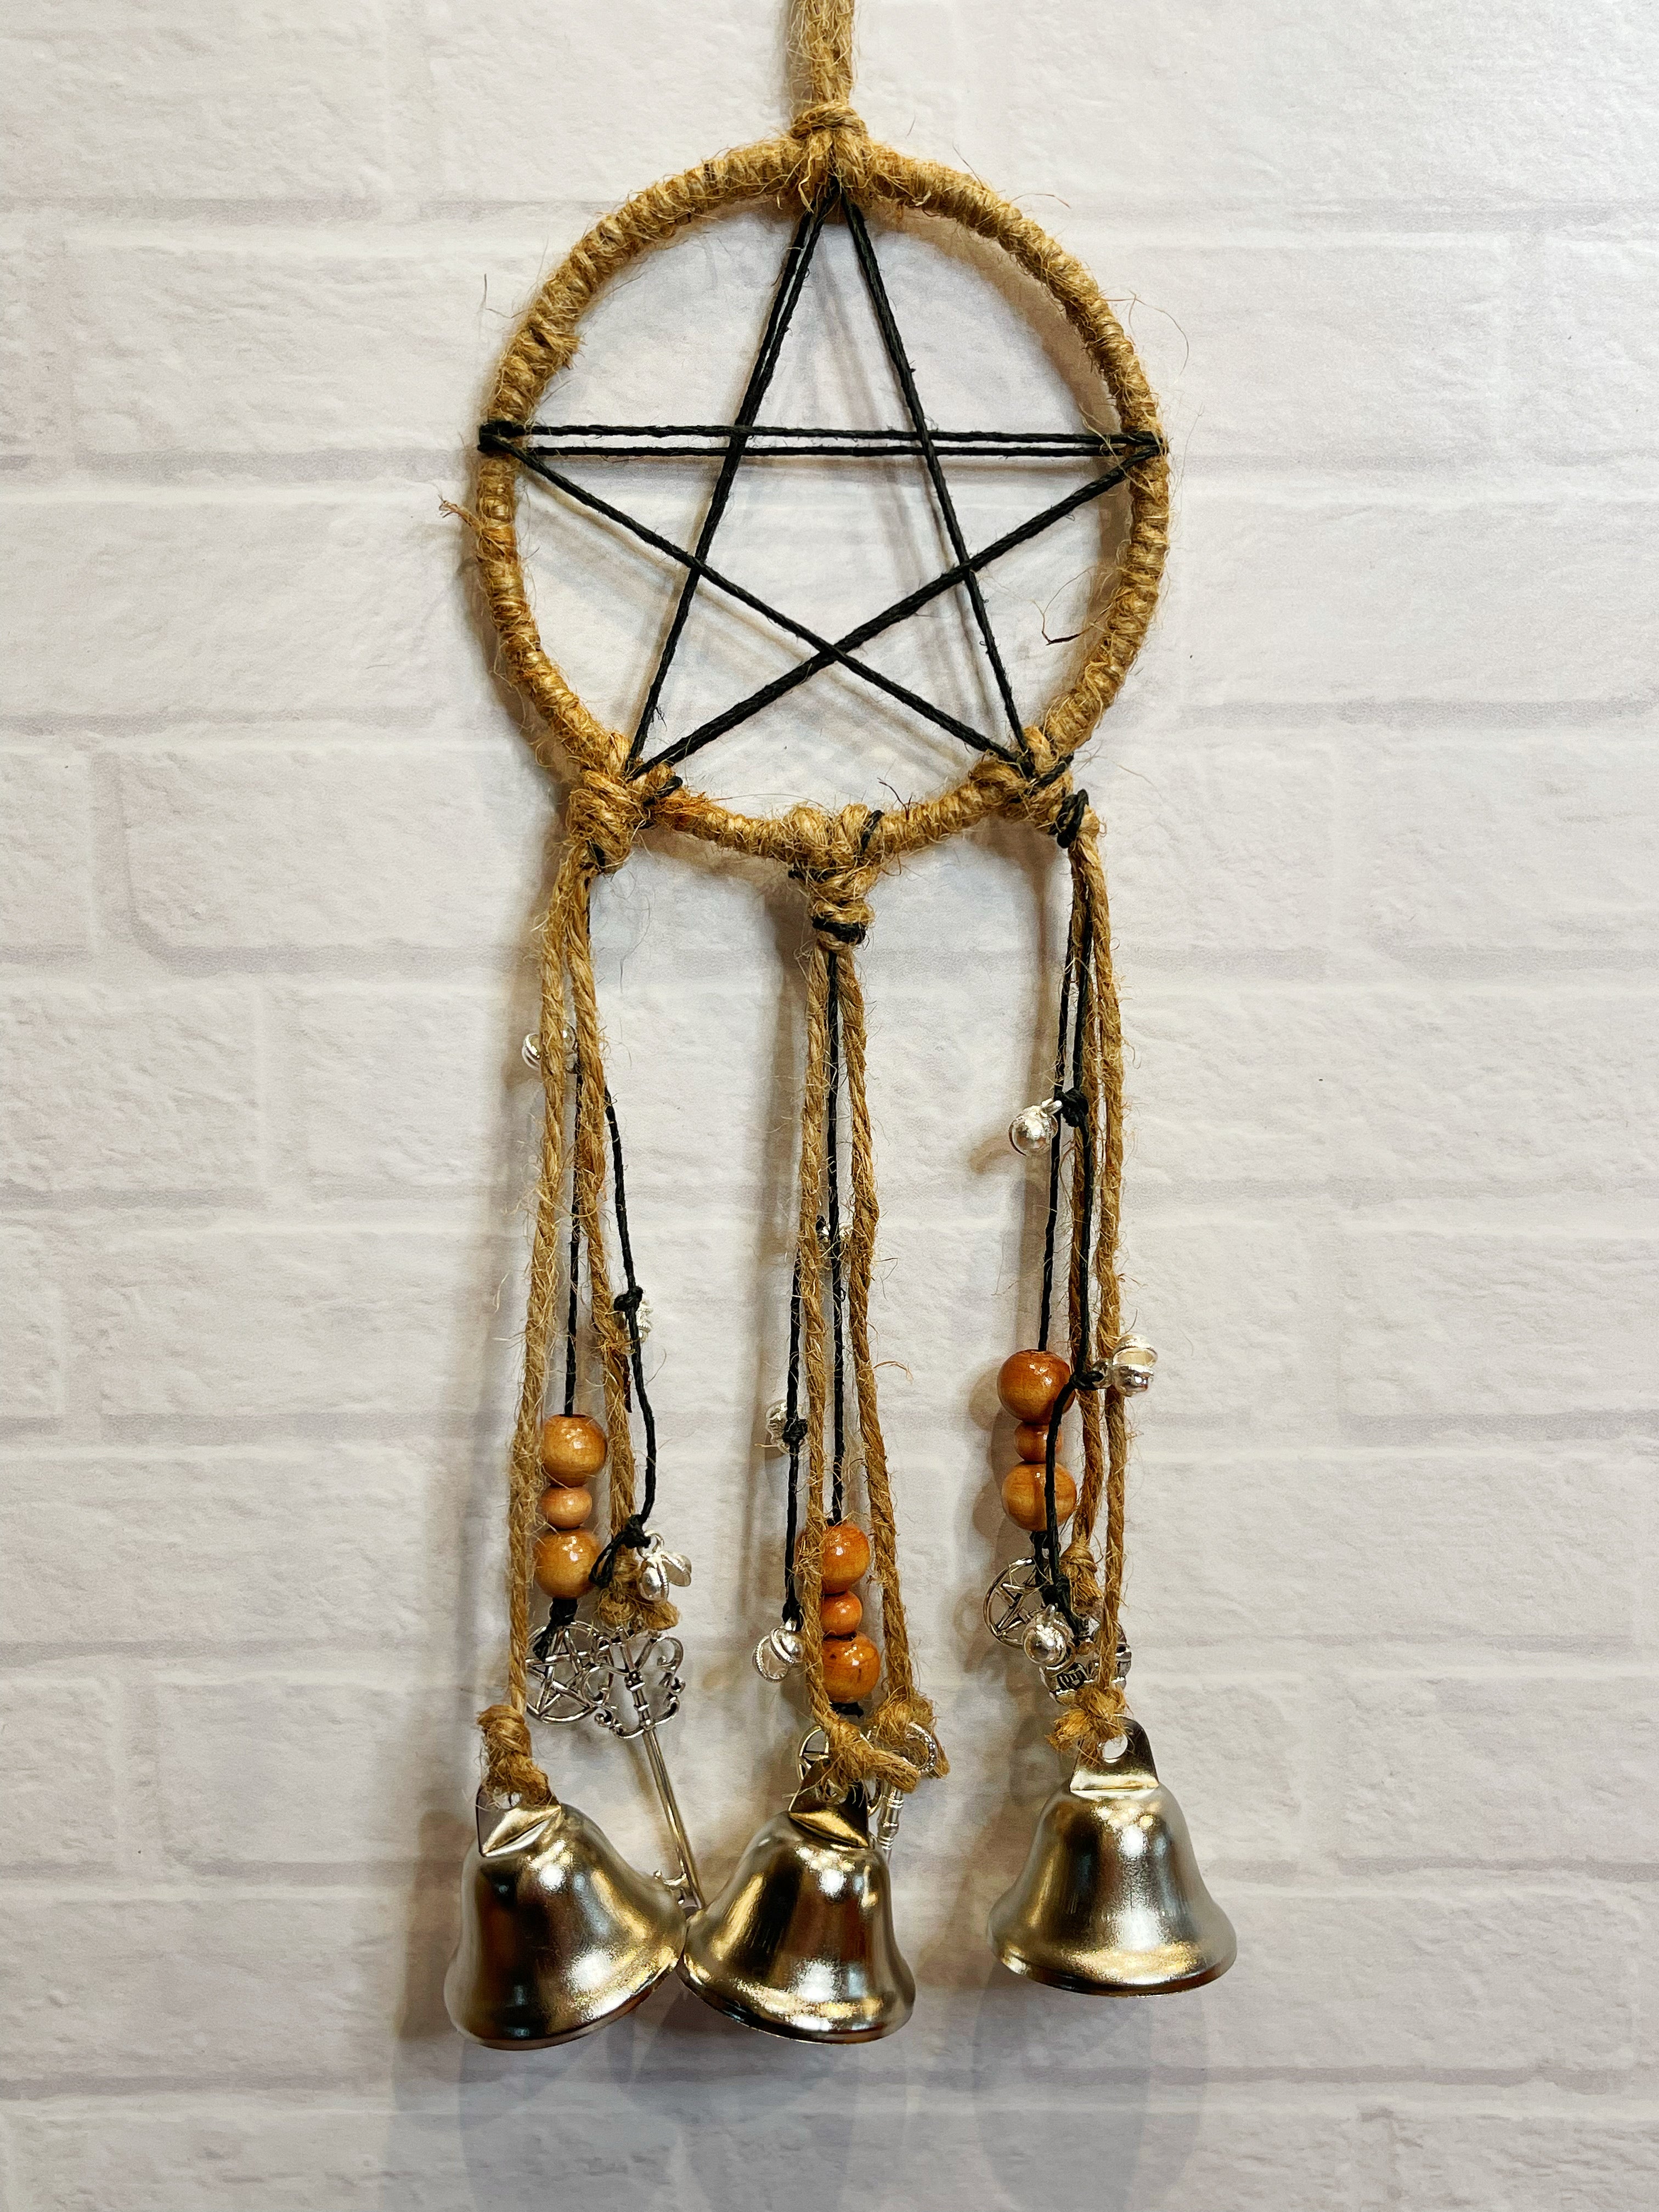 Pentagram Witches Bells – The Eclectic Witches Loft